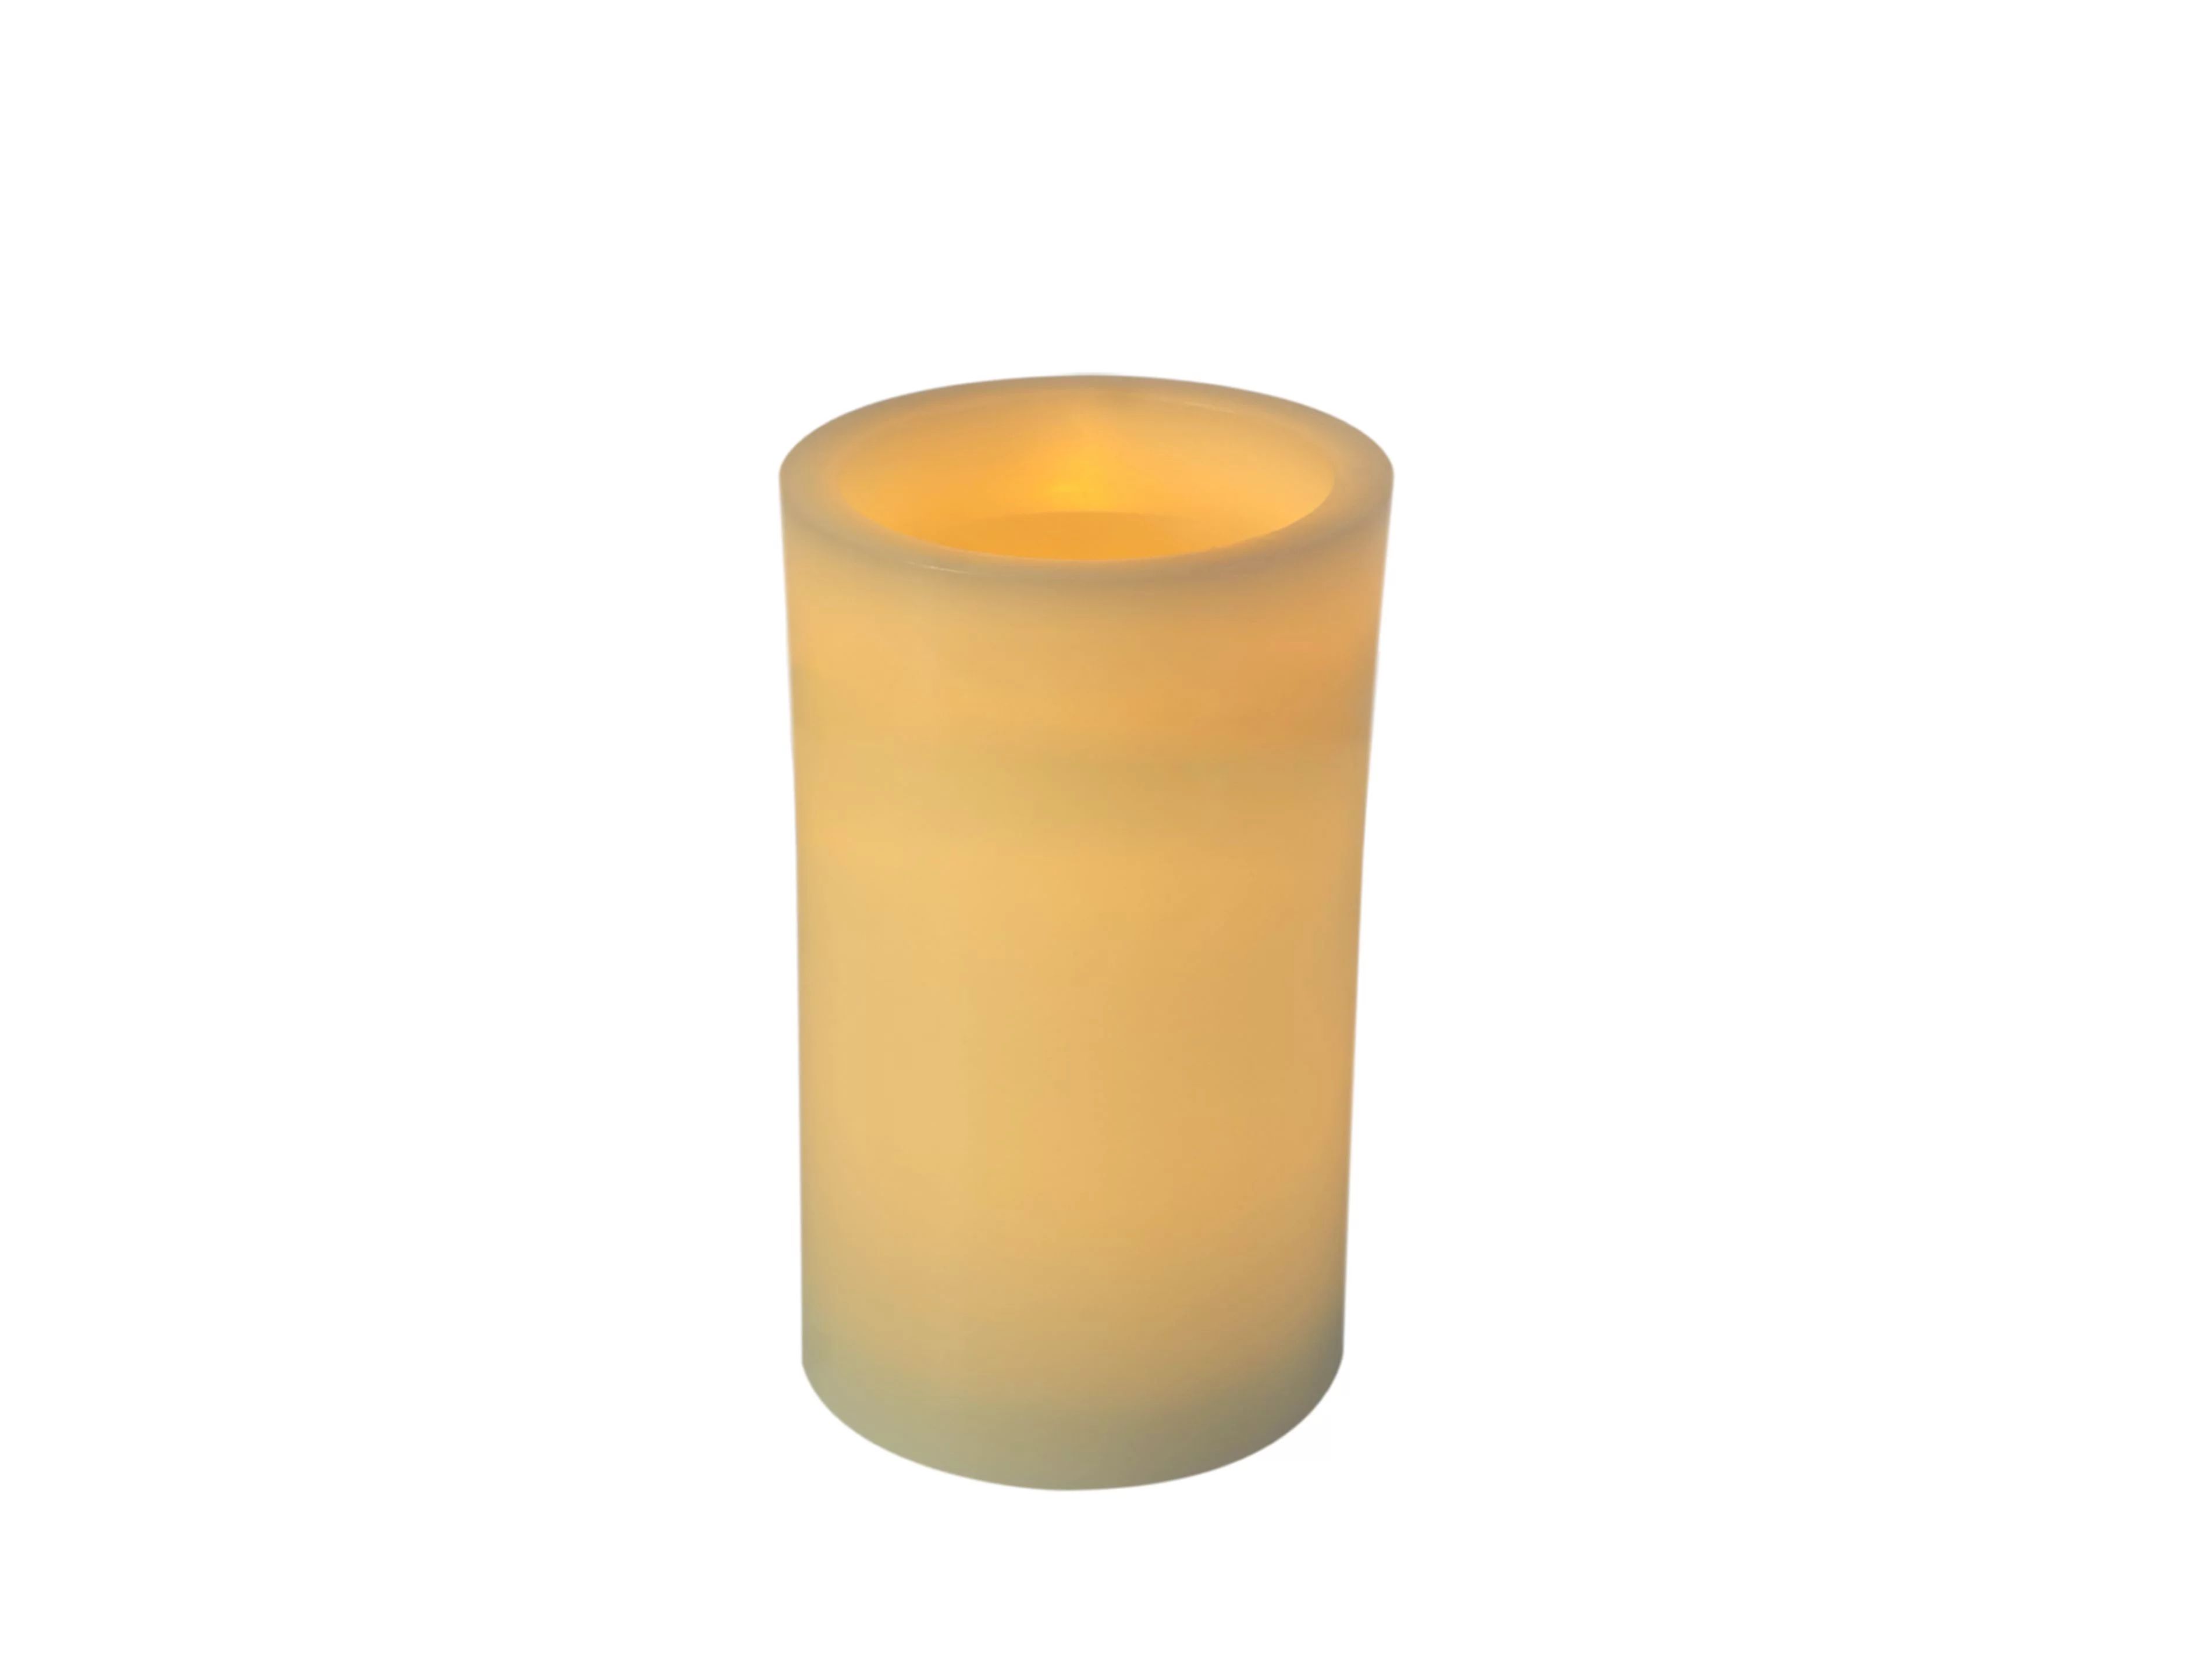 Mainstays 3x6 Inch Flameless LED Pillar Candle, Ivory Color, No Scent, Single Pack | Walmart (US)